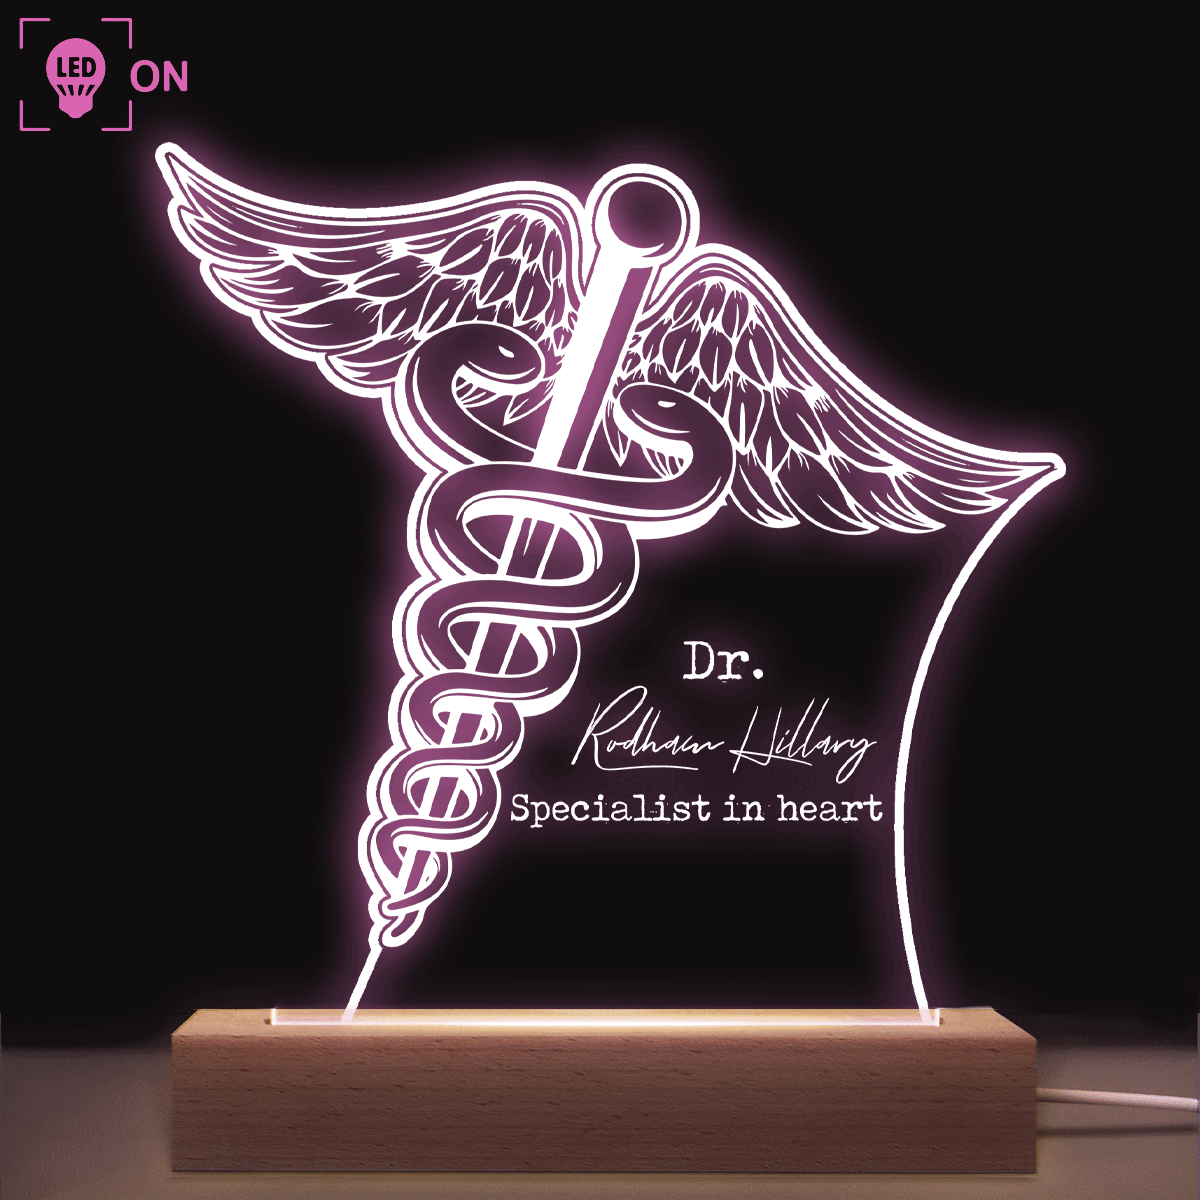 Caduceus Staff of Hermes - Acrylic Plaque Led Lamp - Personalized Gift for Nurse, Doctor, CNA, Healthcare, Registered RN - Suzitee Store